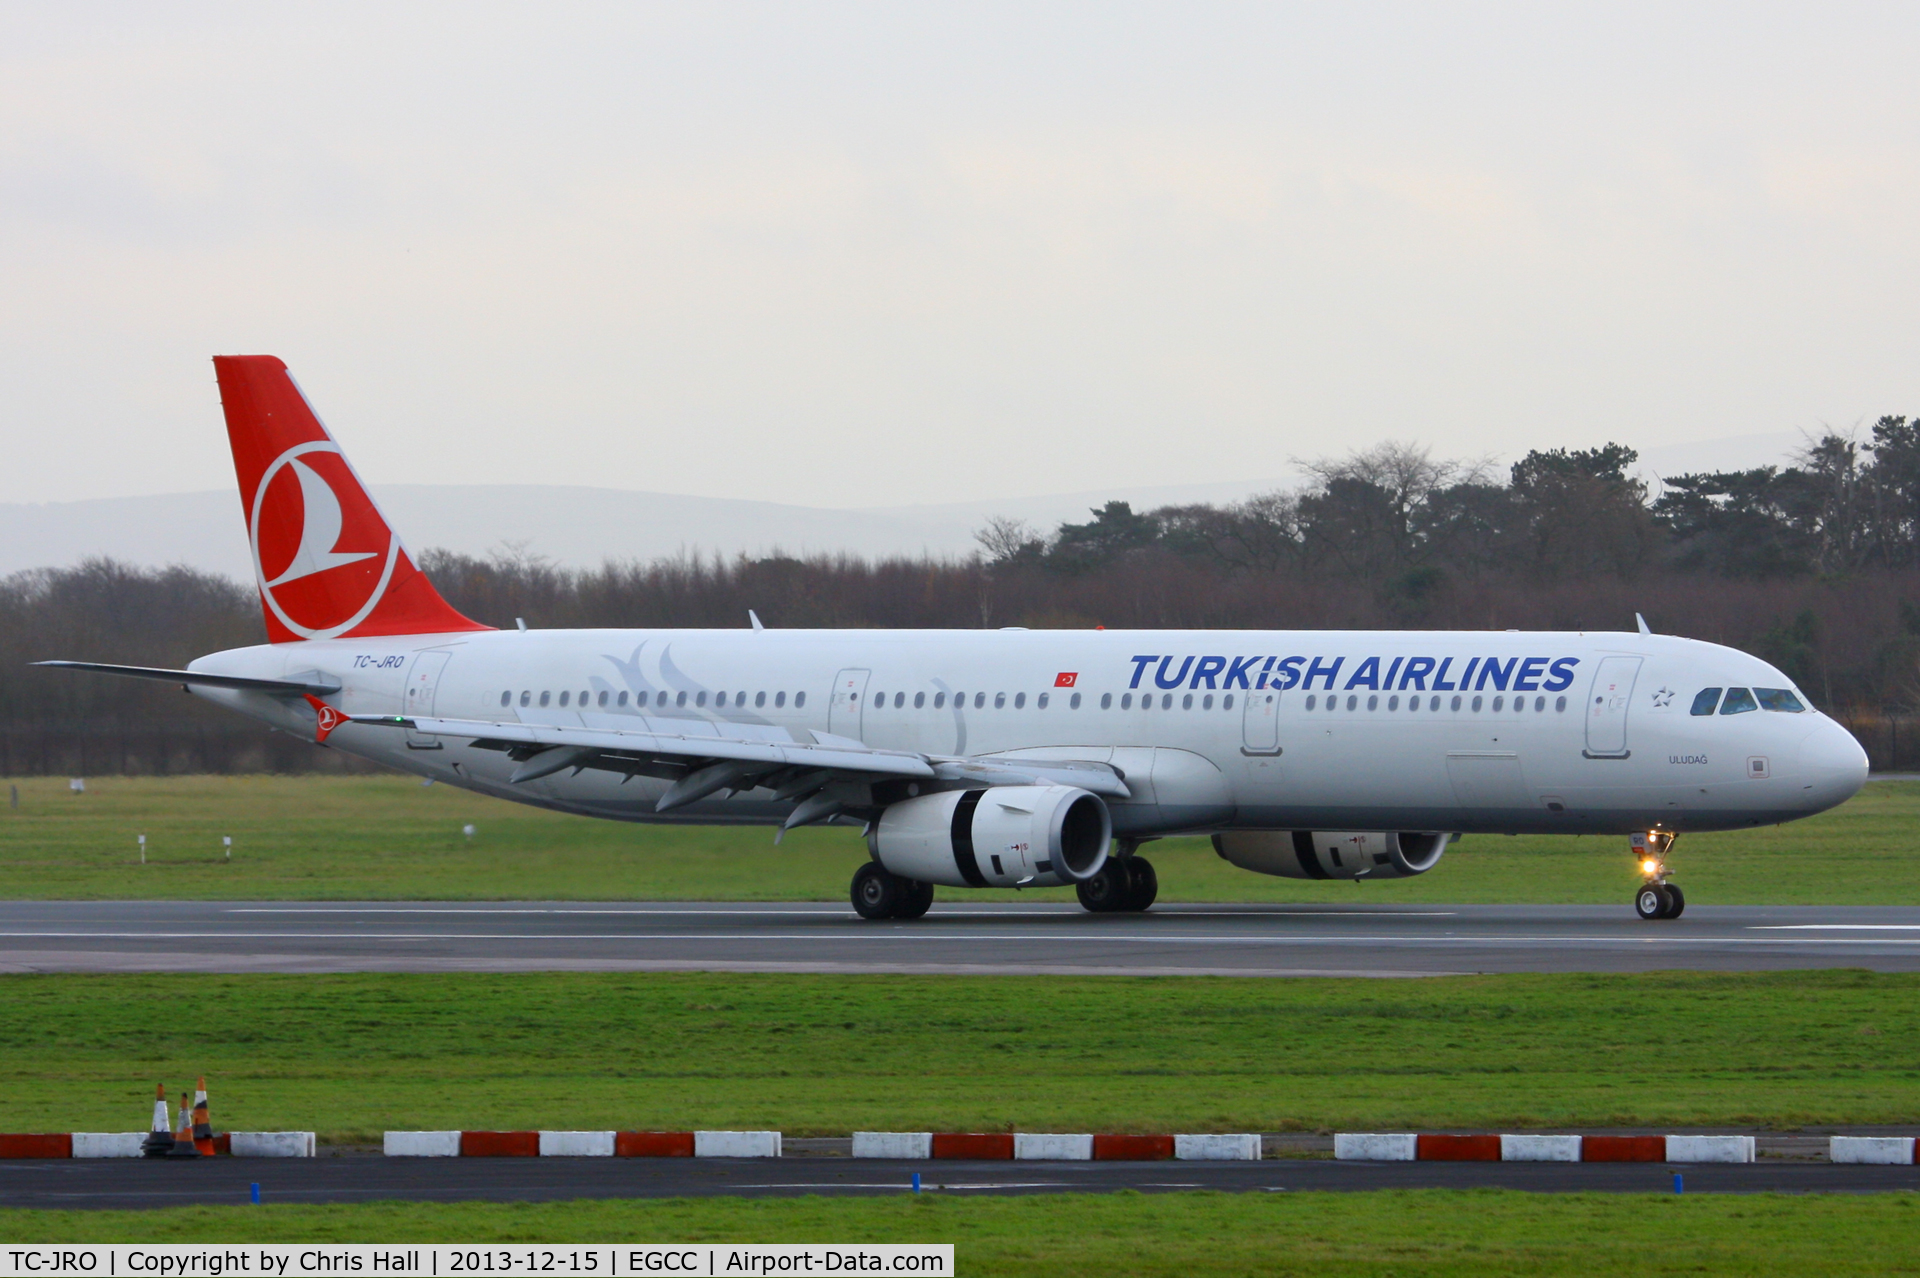 TC-JRO, 2011 Airbus A321-231 C/N 4682, Turkish Airlines